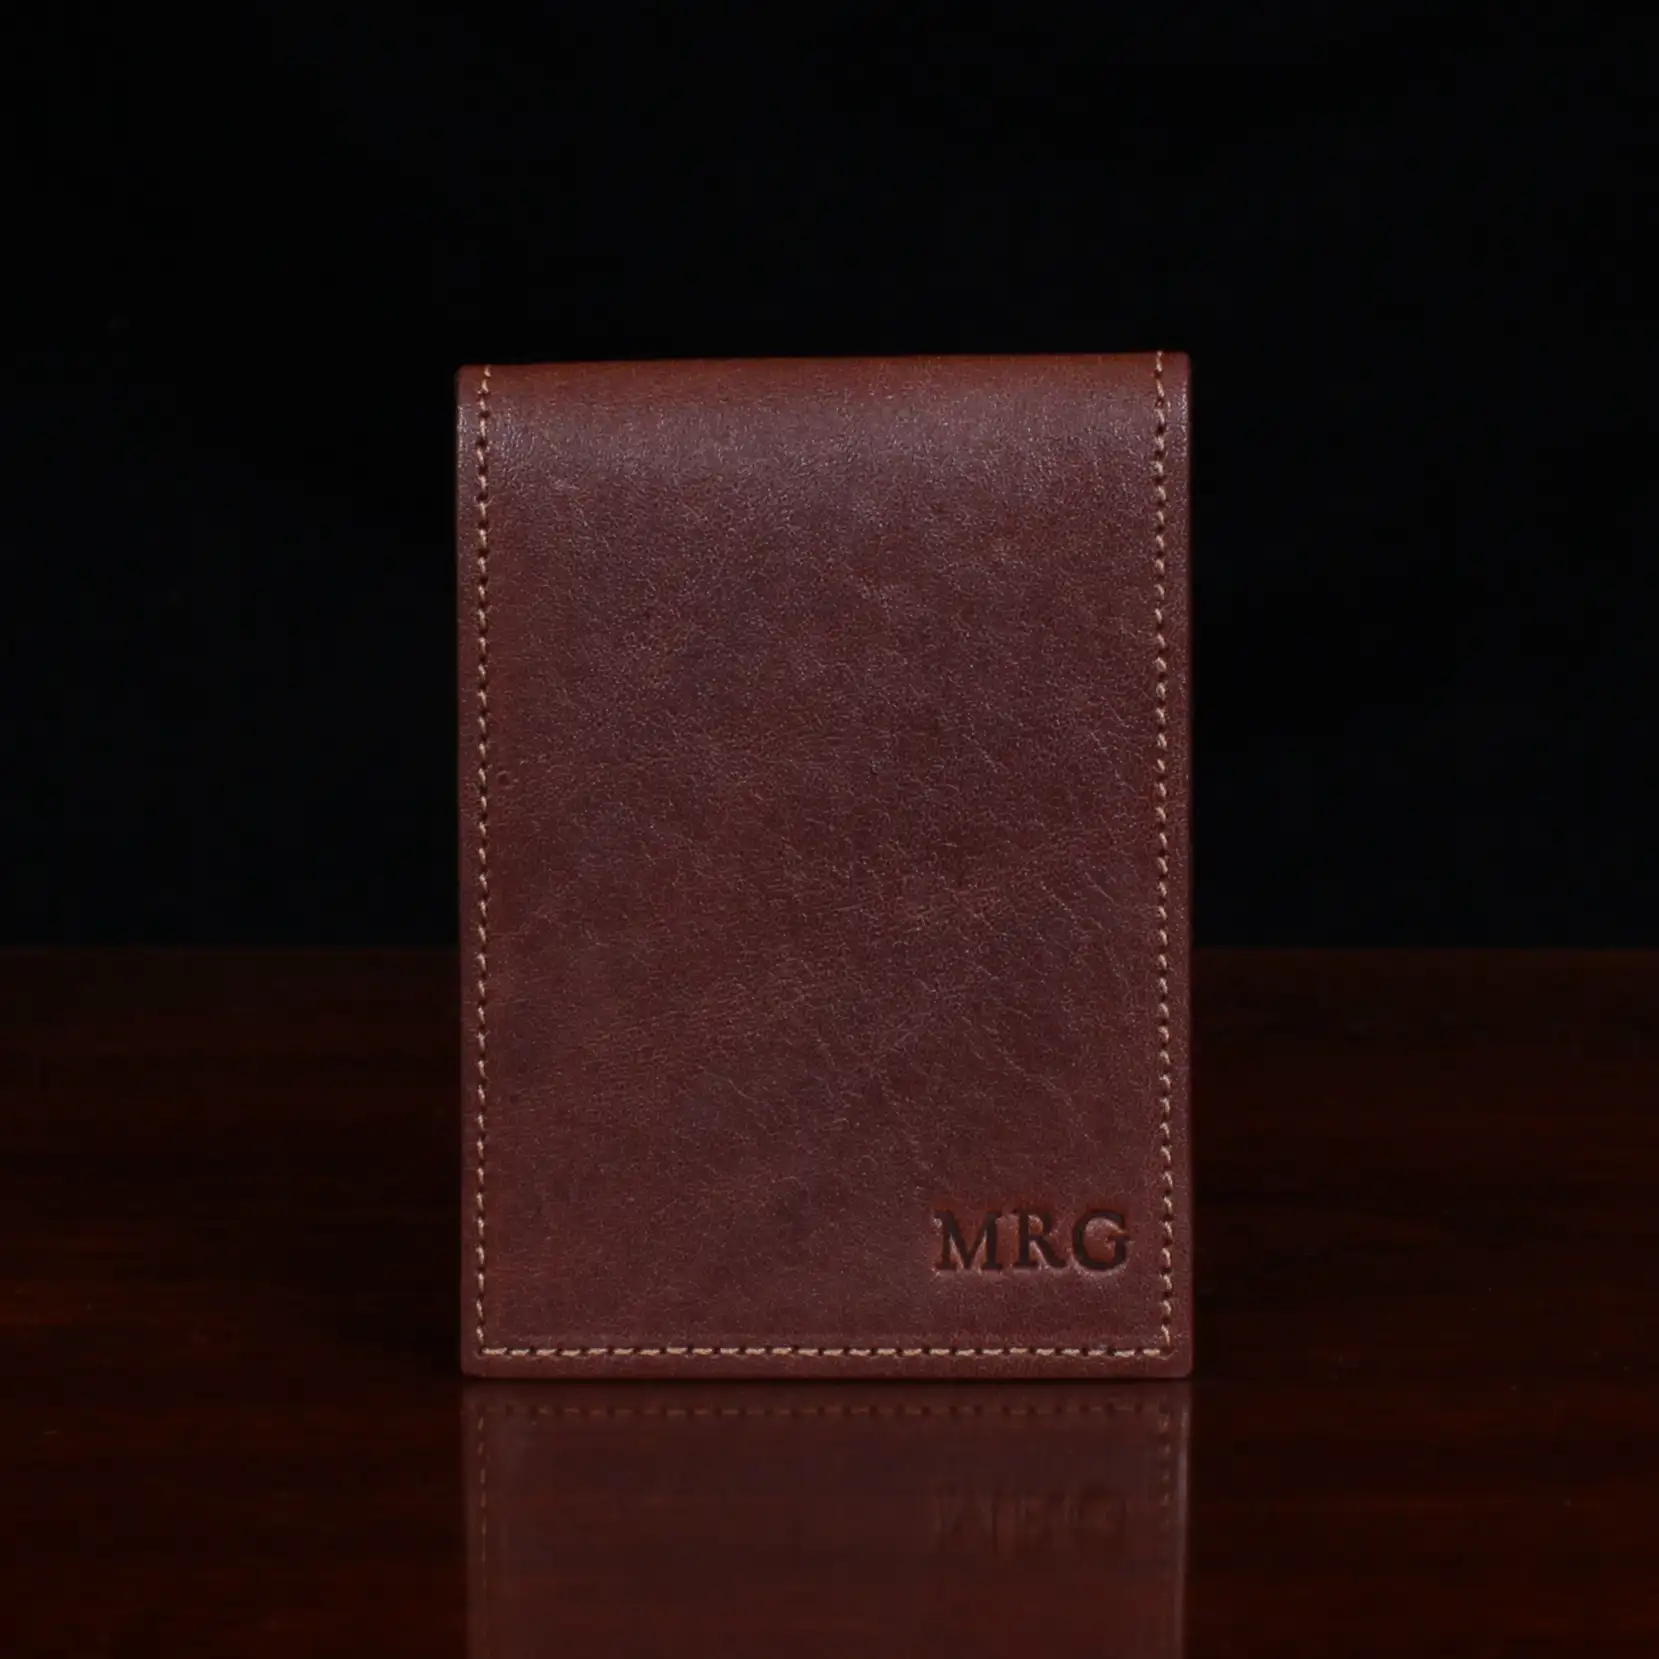 10cc Bifold Wallet in Navy and Red, ANTORINI Naples